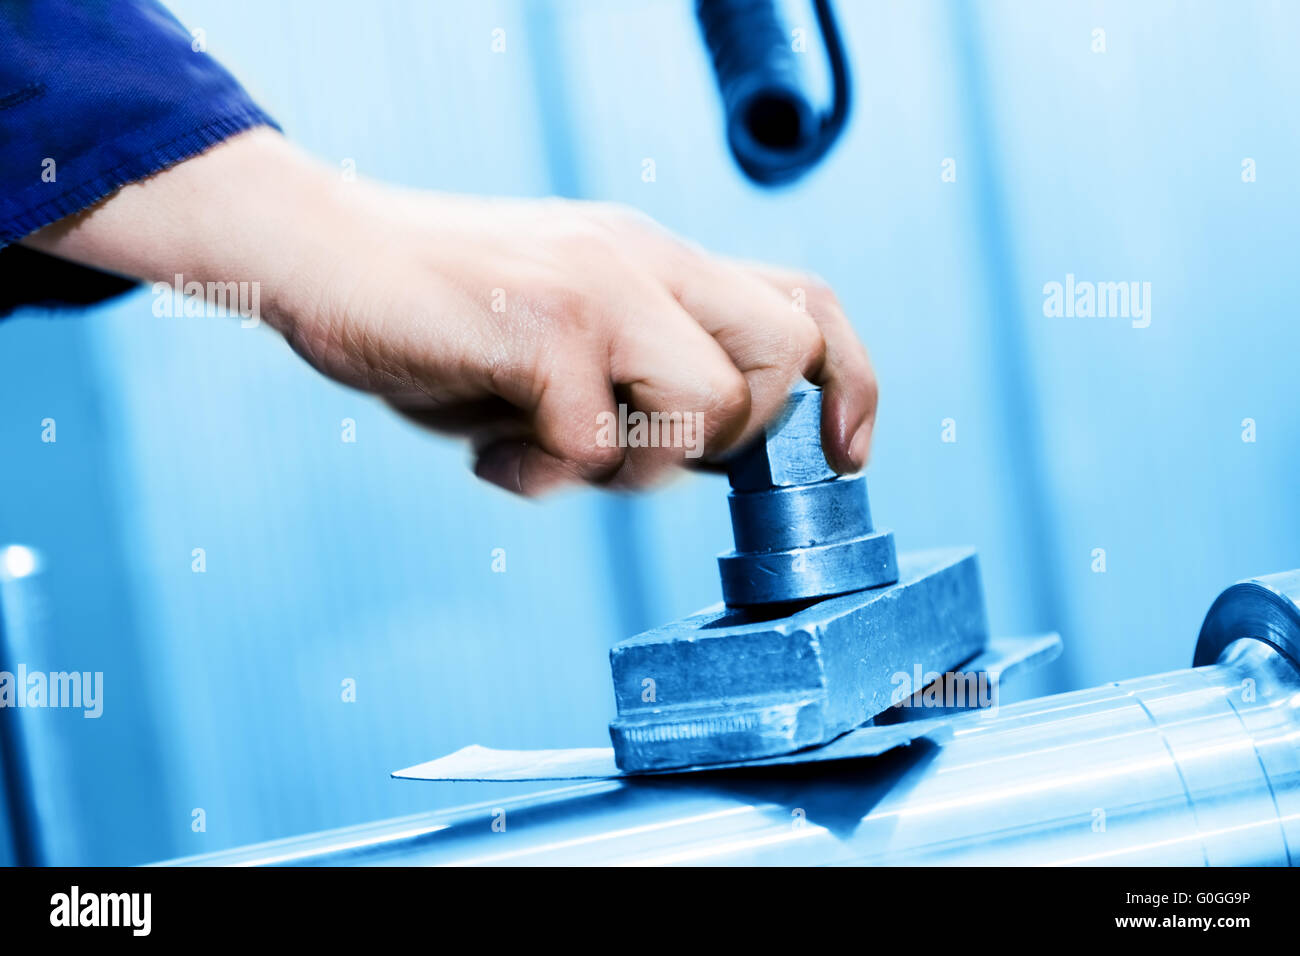 Drilling and boring machine at work. Industry, industrial Stock Photo